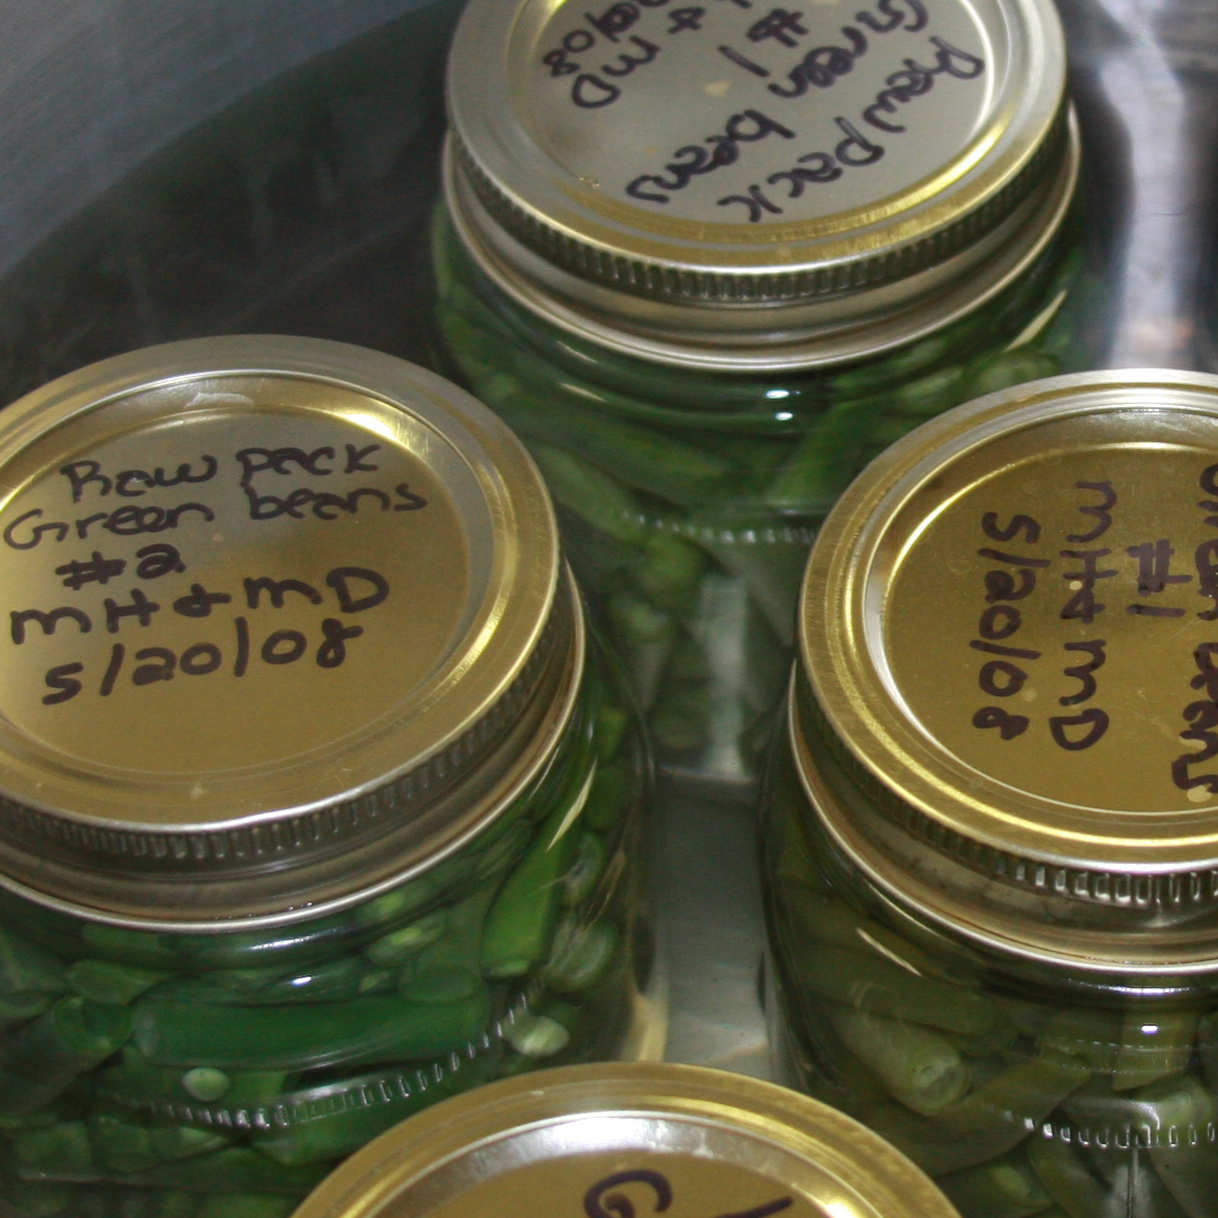 Canning beans in a pressure canner. May 2008.